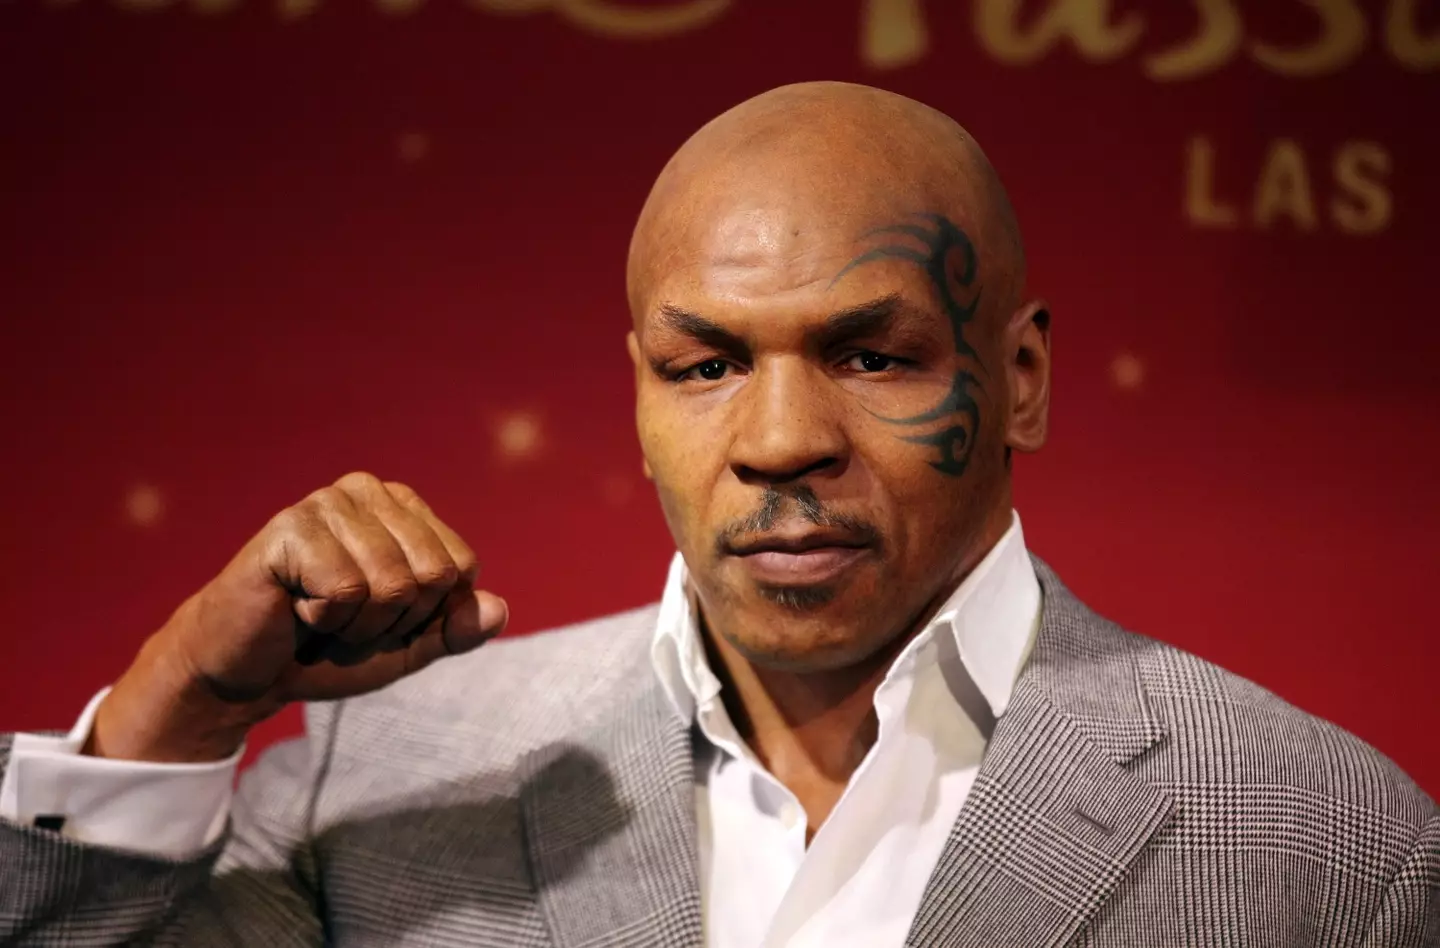 Mike Tyson won’t face charges after hitting a plane passenger.